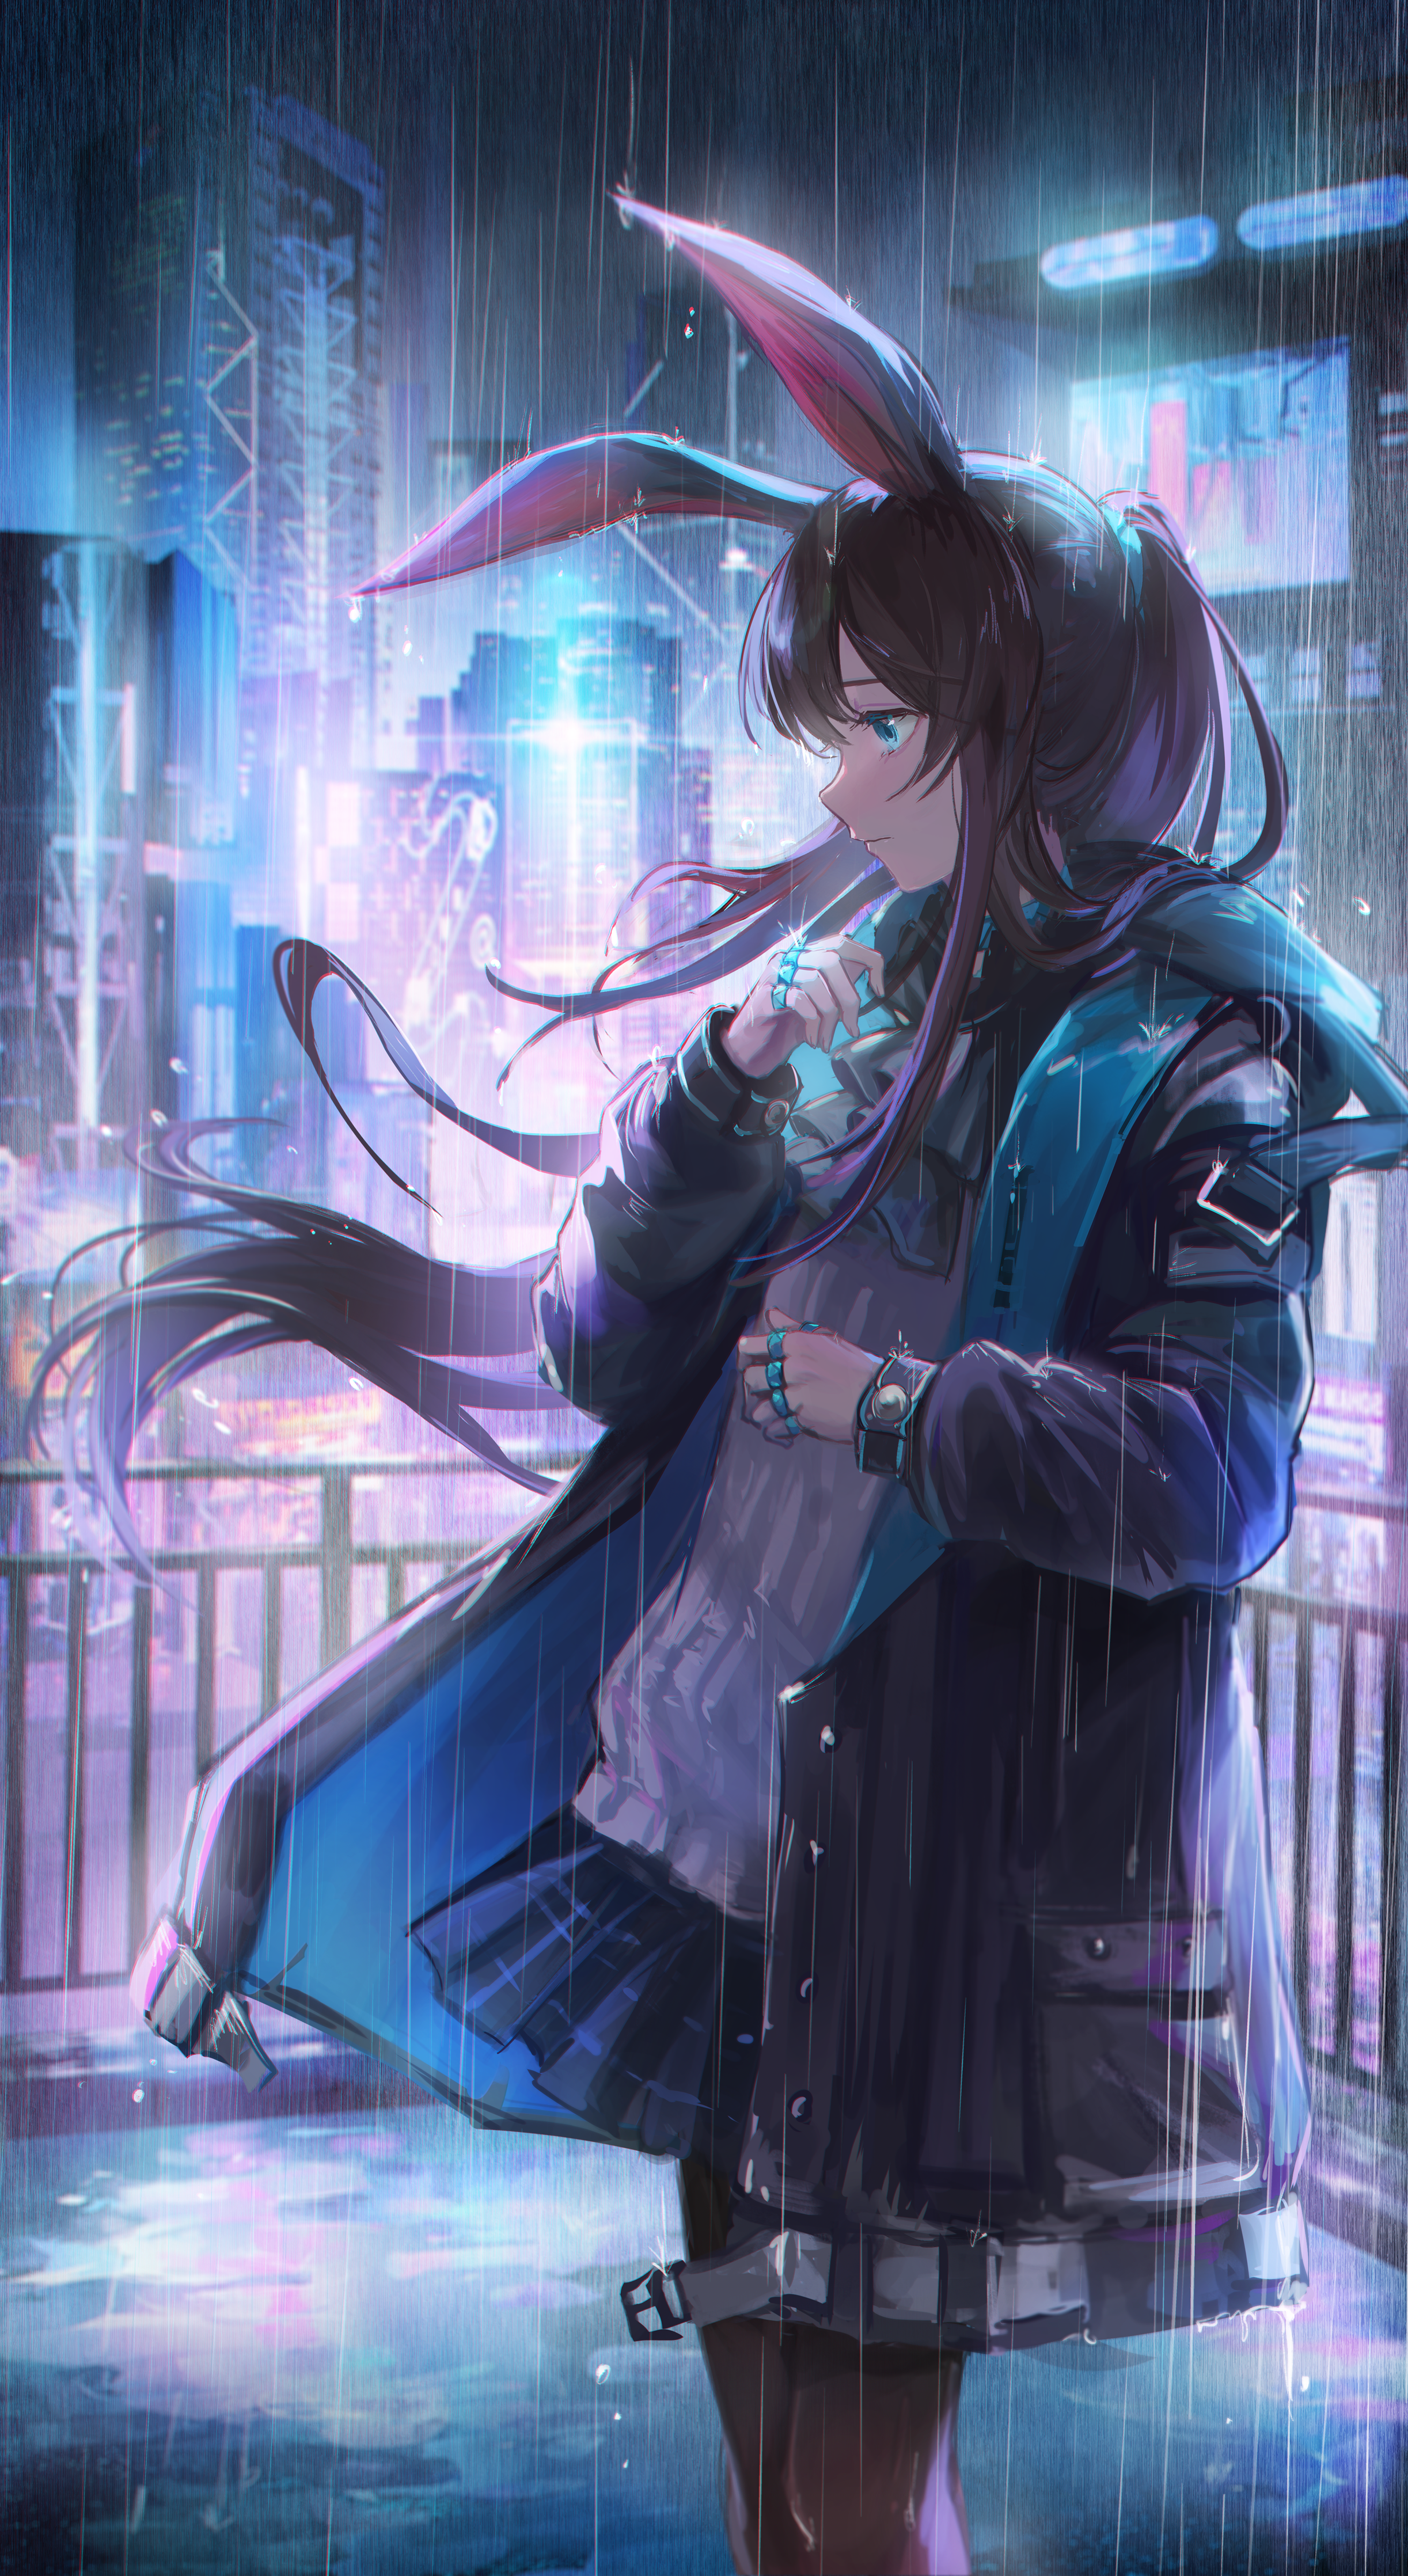 Anime 2624x4800 anime anime girls Amiya (Arknights) rain Arknights kyusoukyu portrait display long hair city lights brunette blue eyes open jacket jacket rooftops railing closed mouth building night skirt ascot city ponytail looking sideways wind hair blowing in the wind bunny ears bunny girl